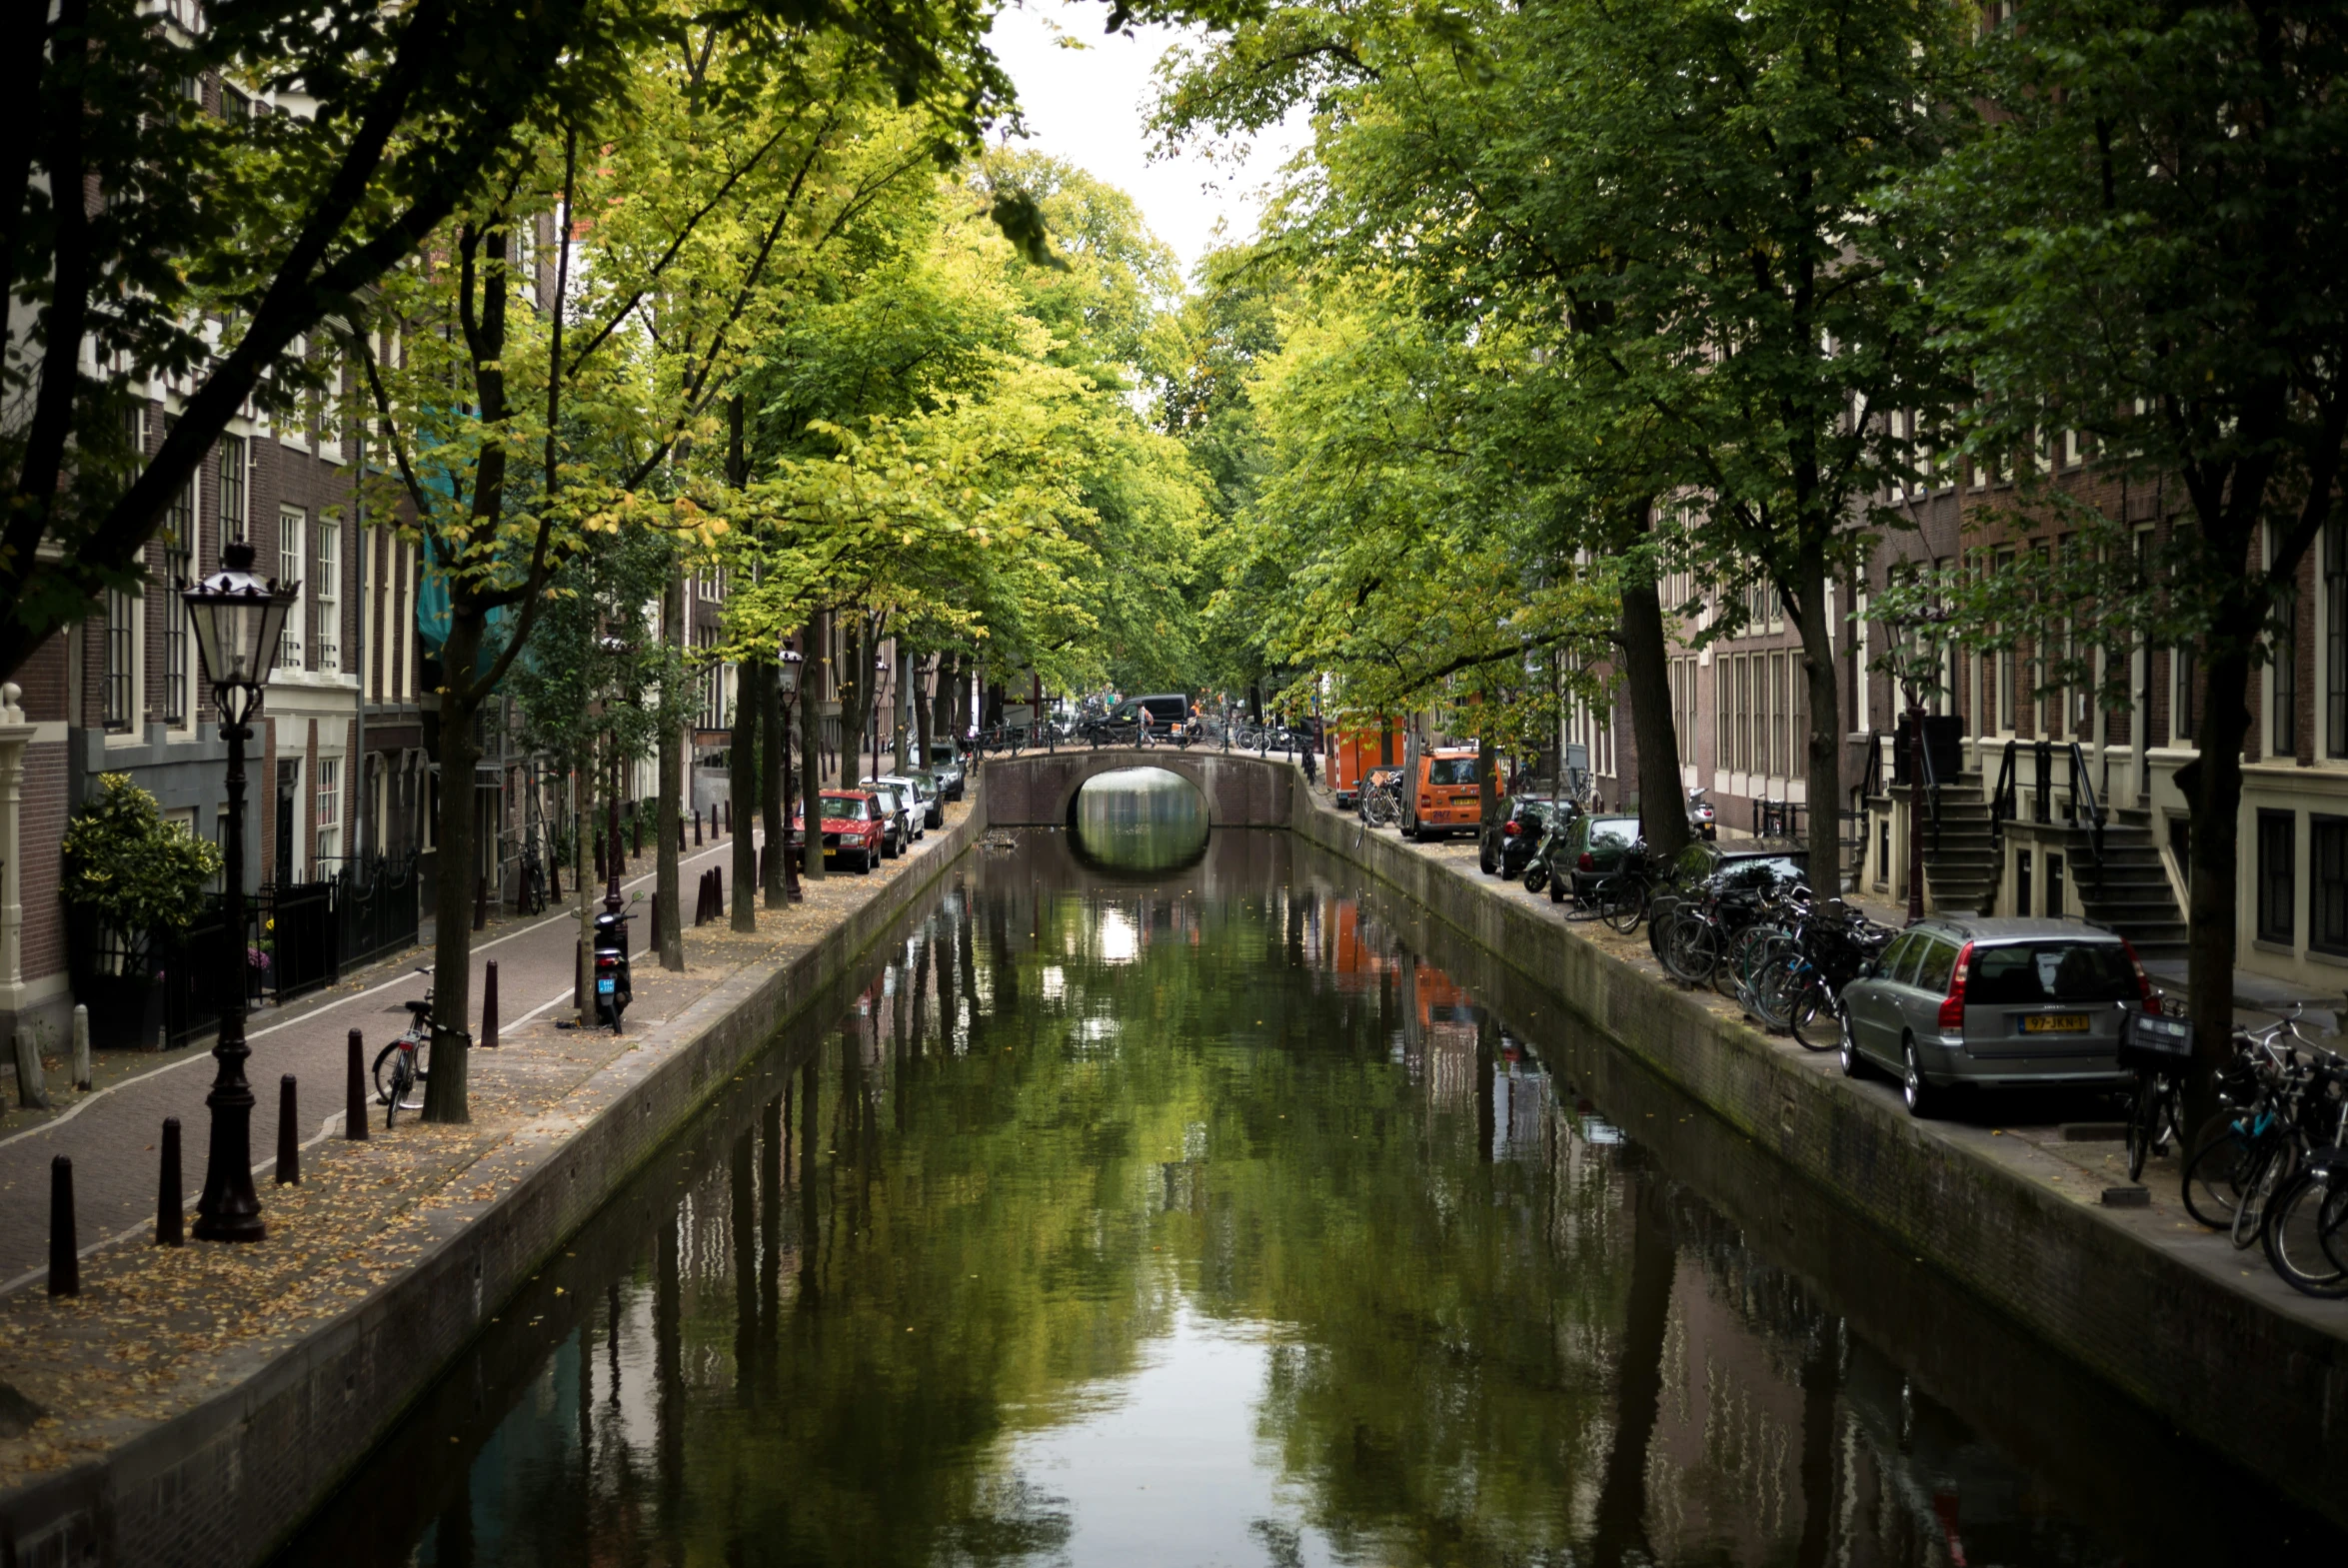 a city canal in the middle of trees